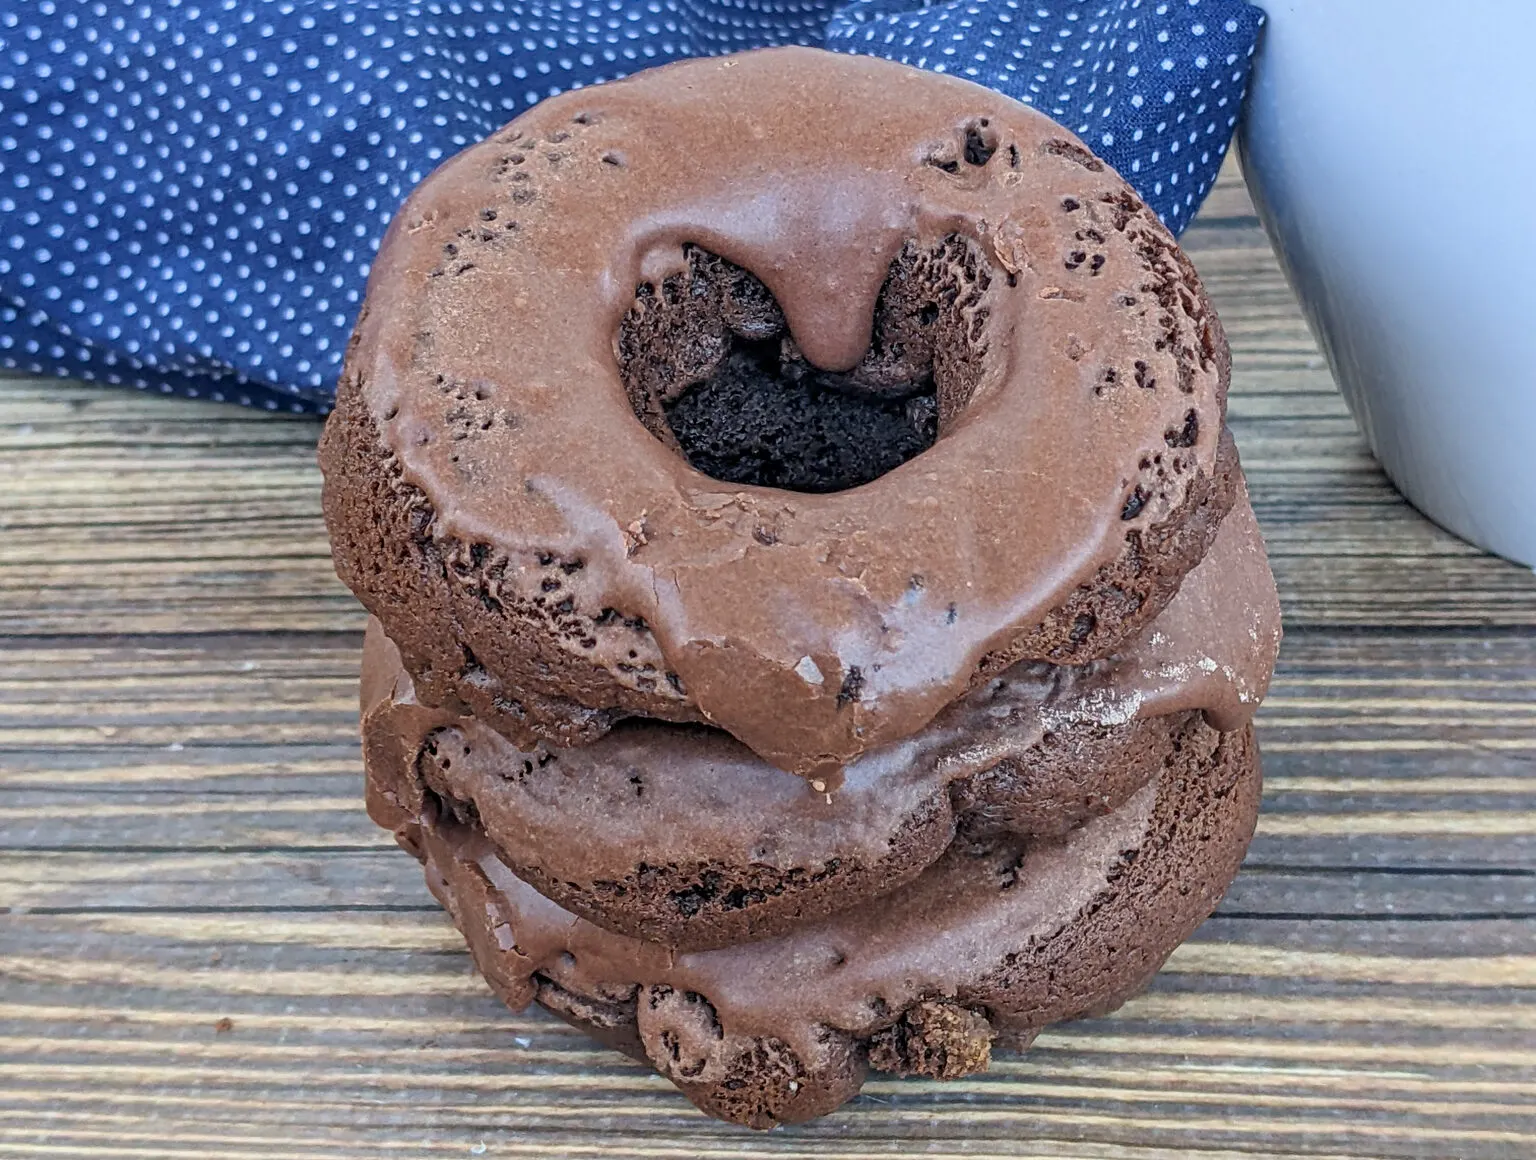 A stack of chocolate donuts on a wooden table.